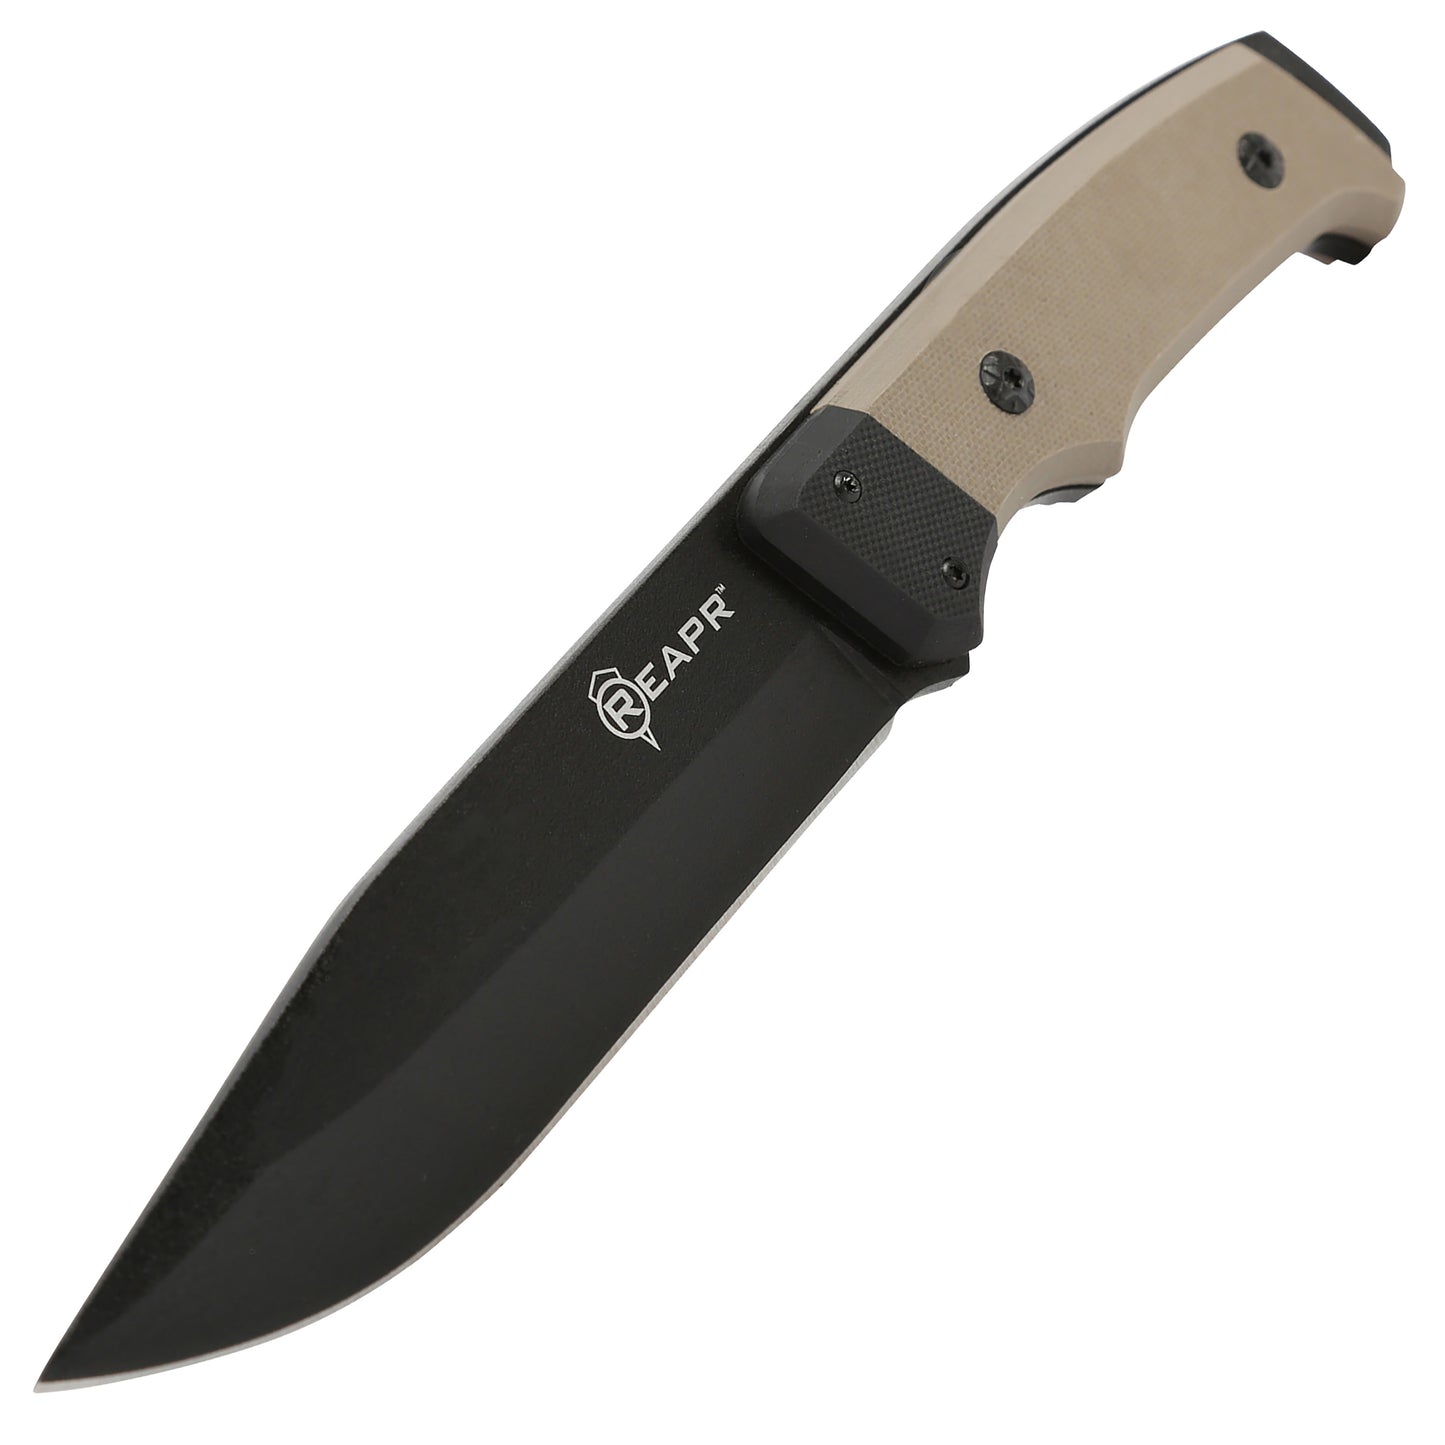 REAPR 11009 Brigade Knife for wilderness emergencies to hunting, guiding and camping